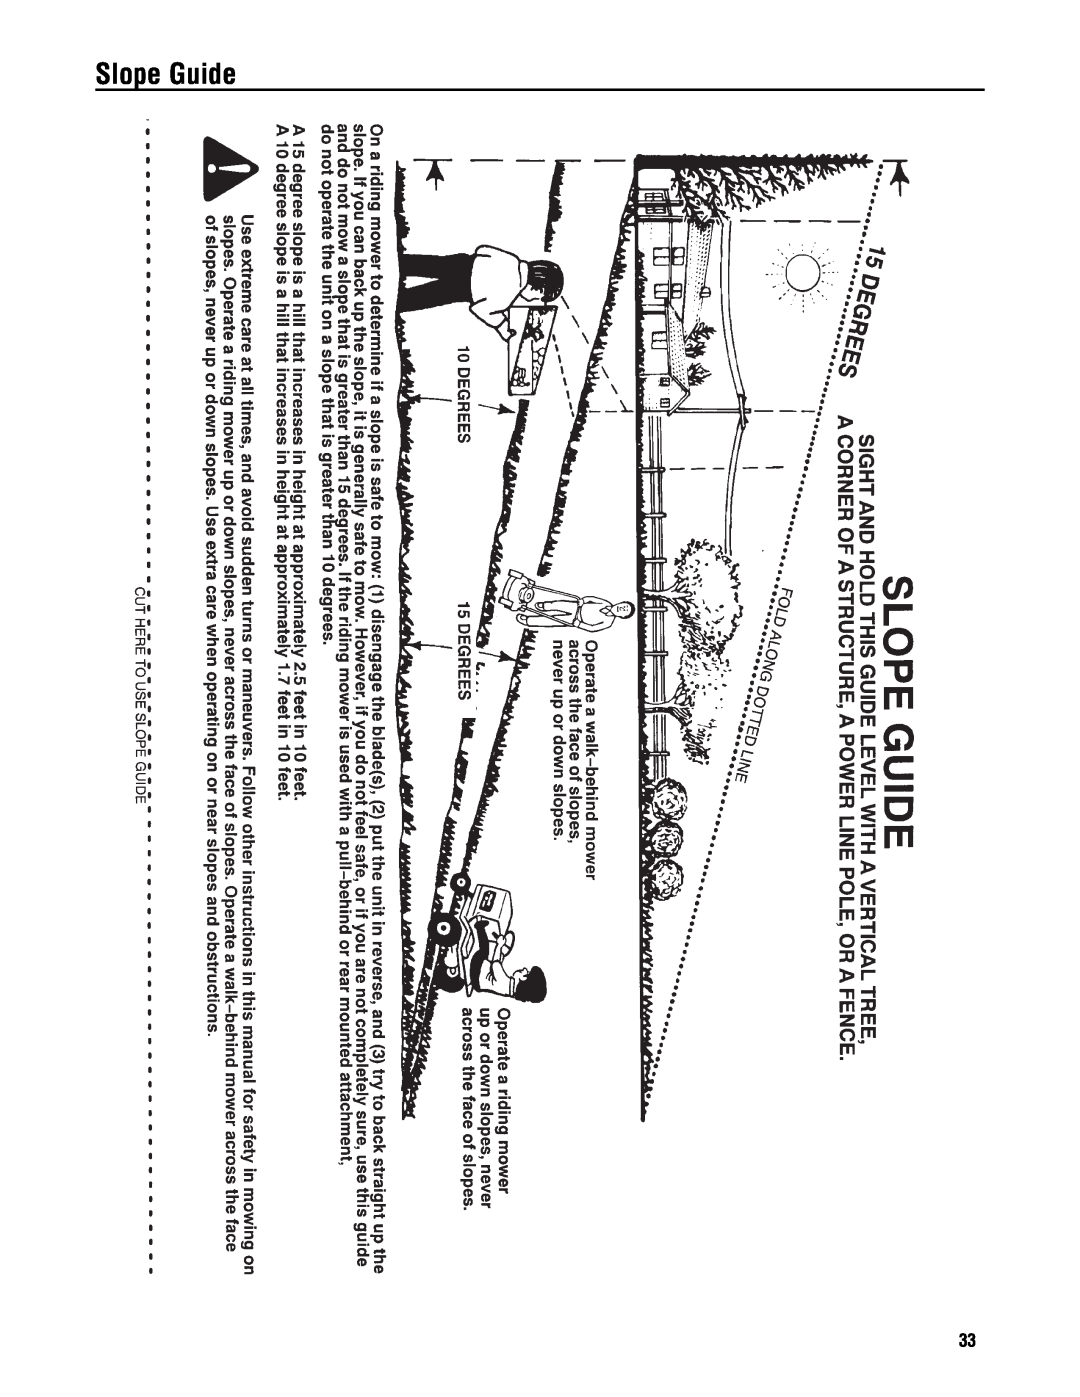 Snapper 3317523BVE specifications Slope Guide 